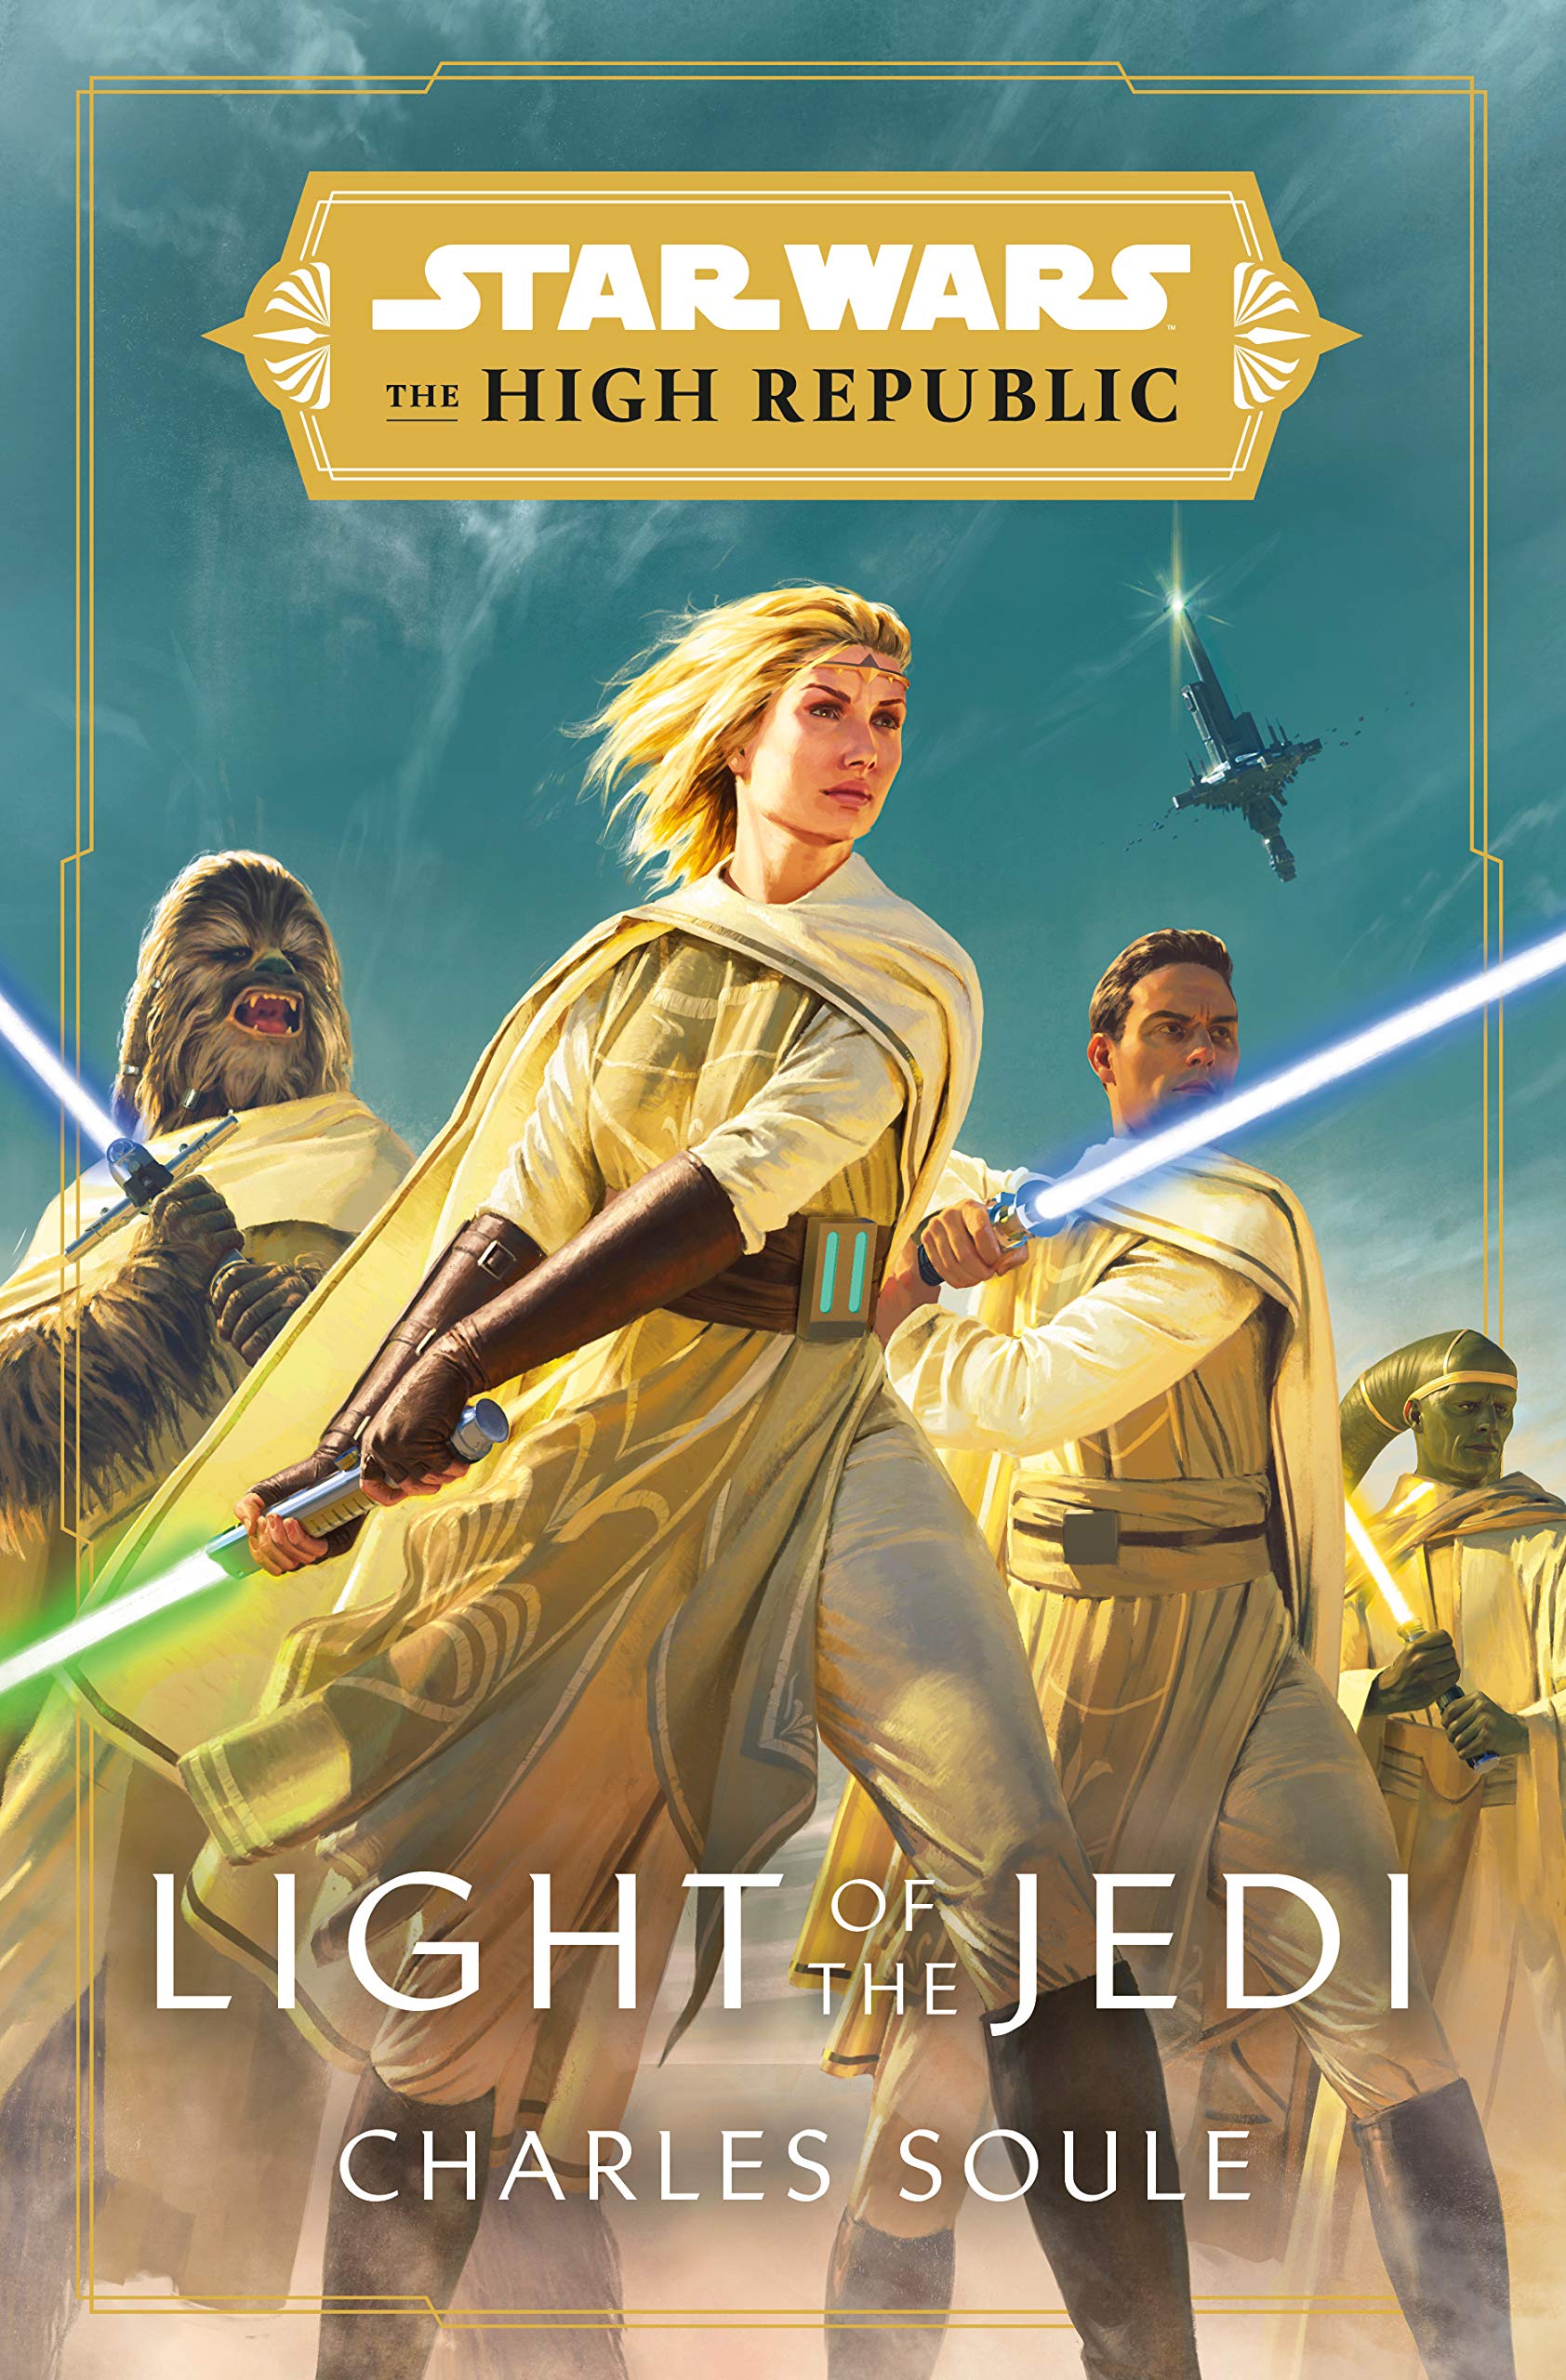 Are there Star Wars books about the Jedi?